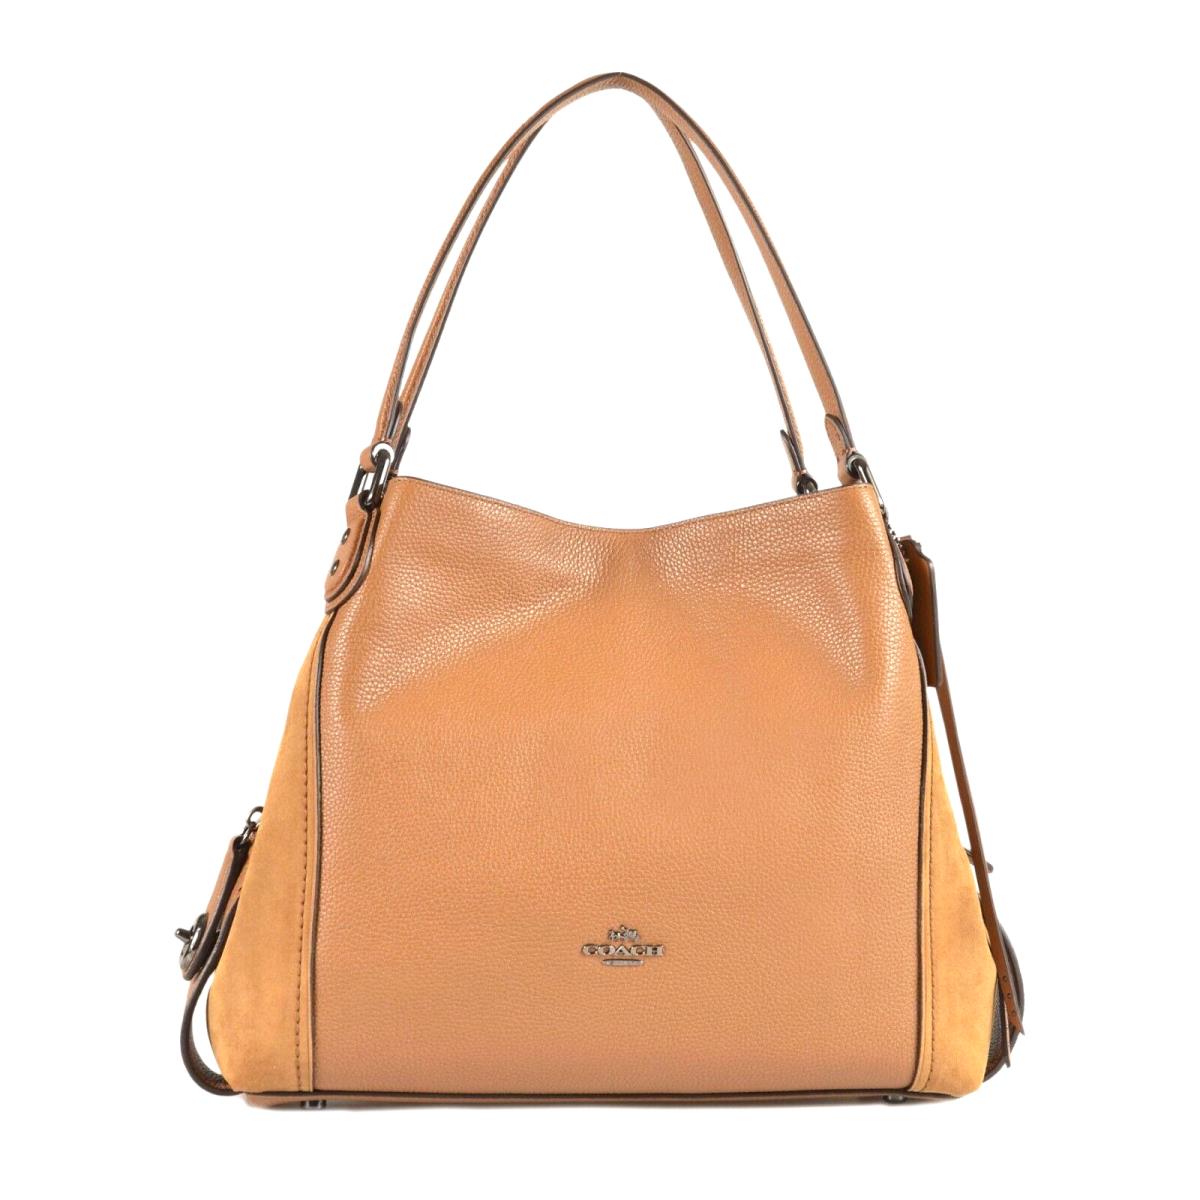 Coach Edie 31 Shoulder Bag Pebble Leather and Suede Light Saddle 59500